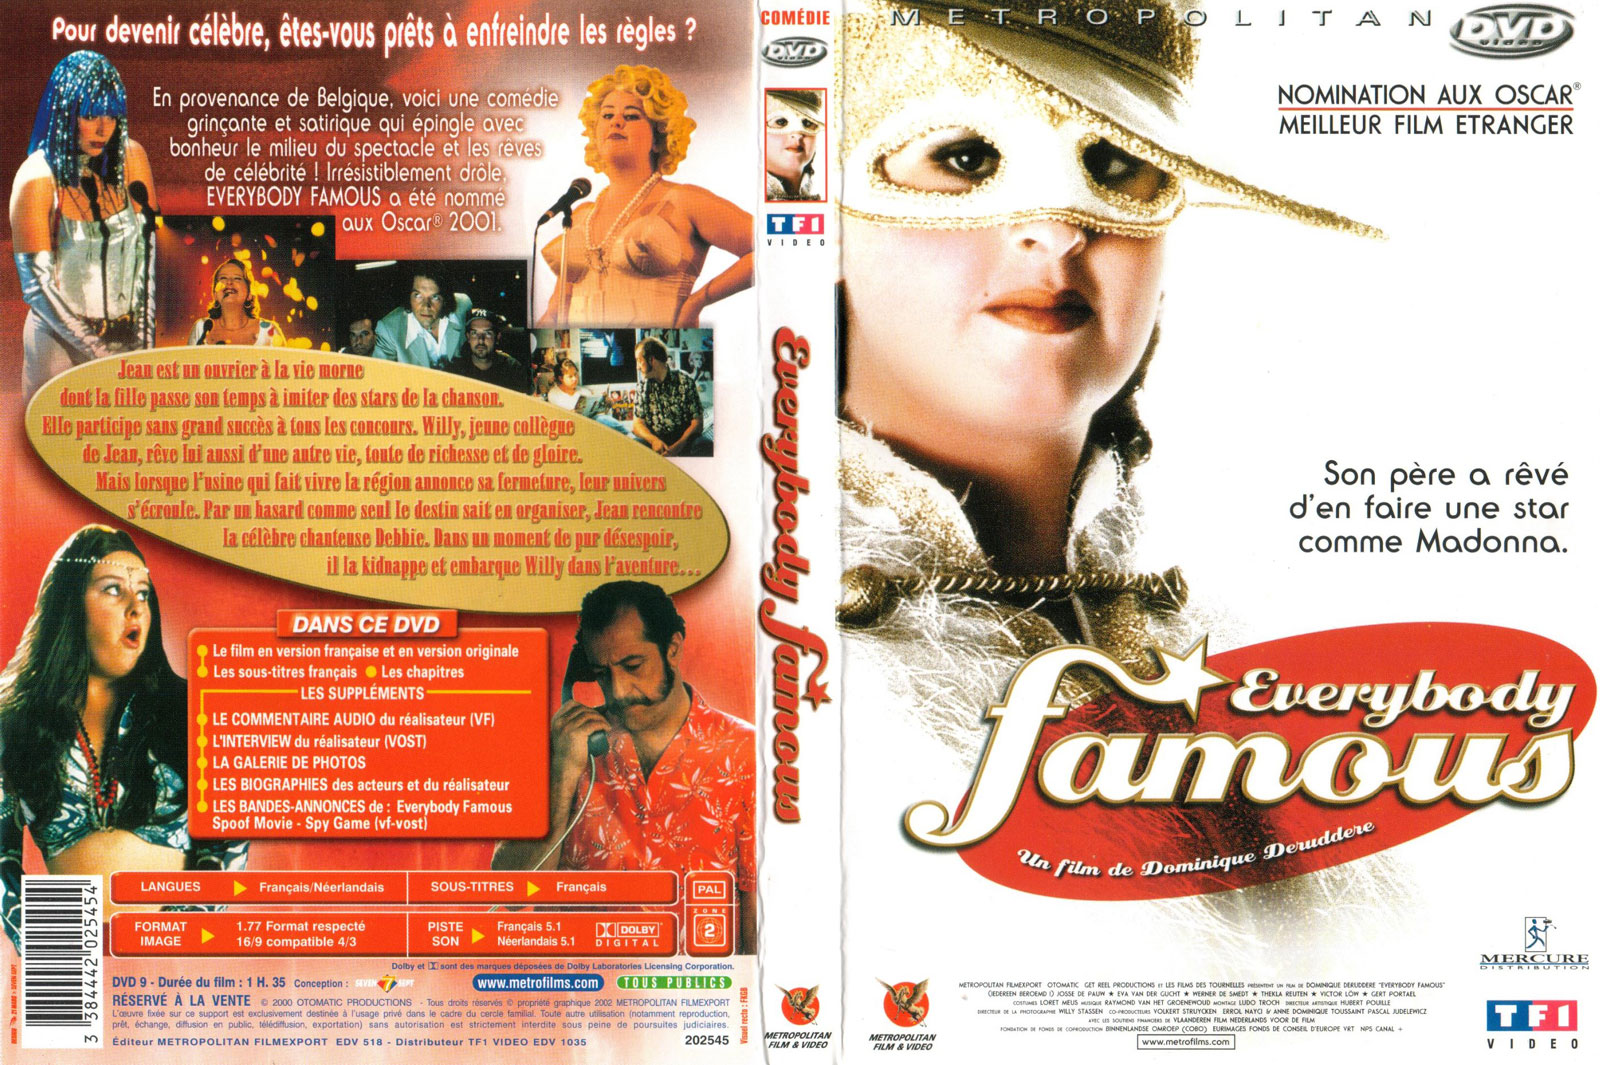 Jaquette DVD Everybody famous